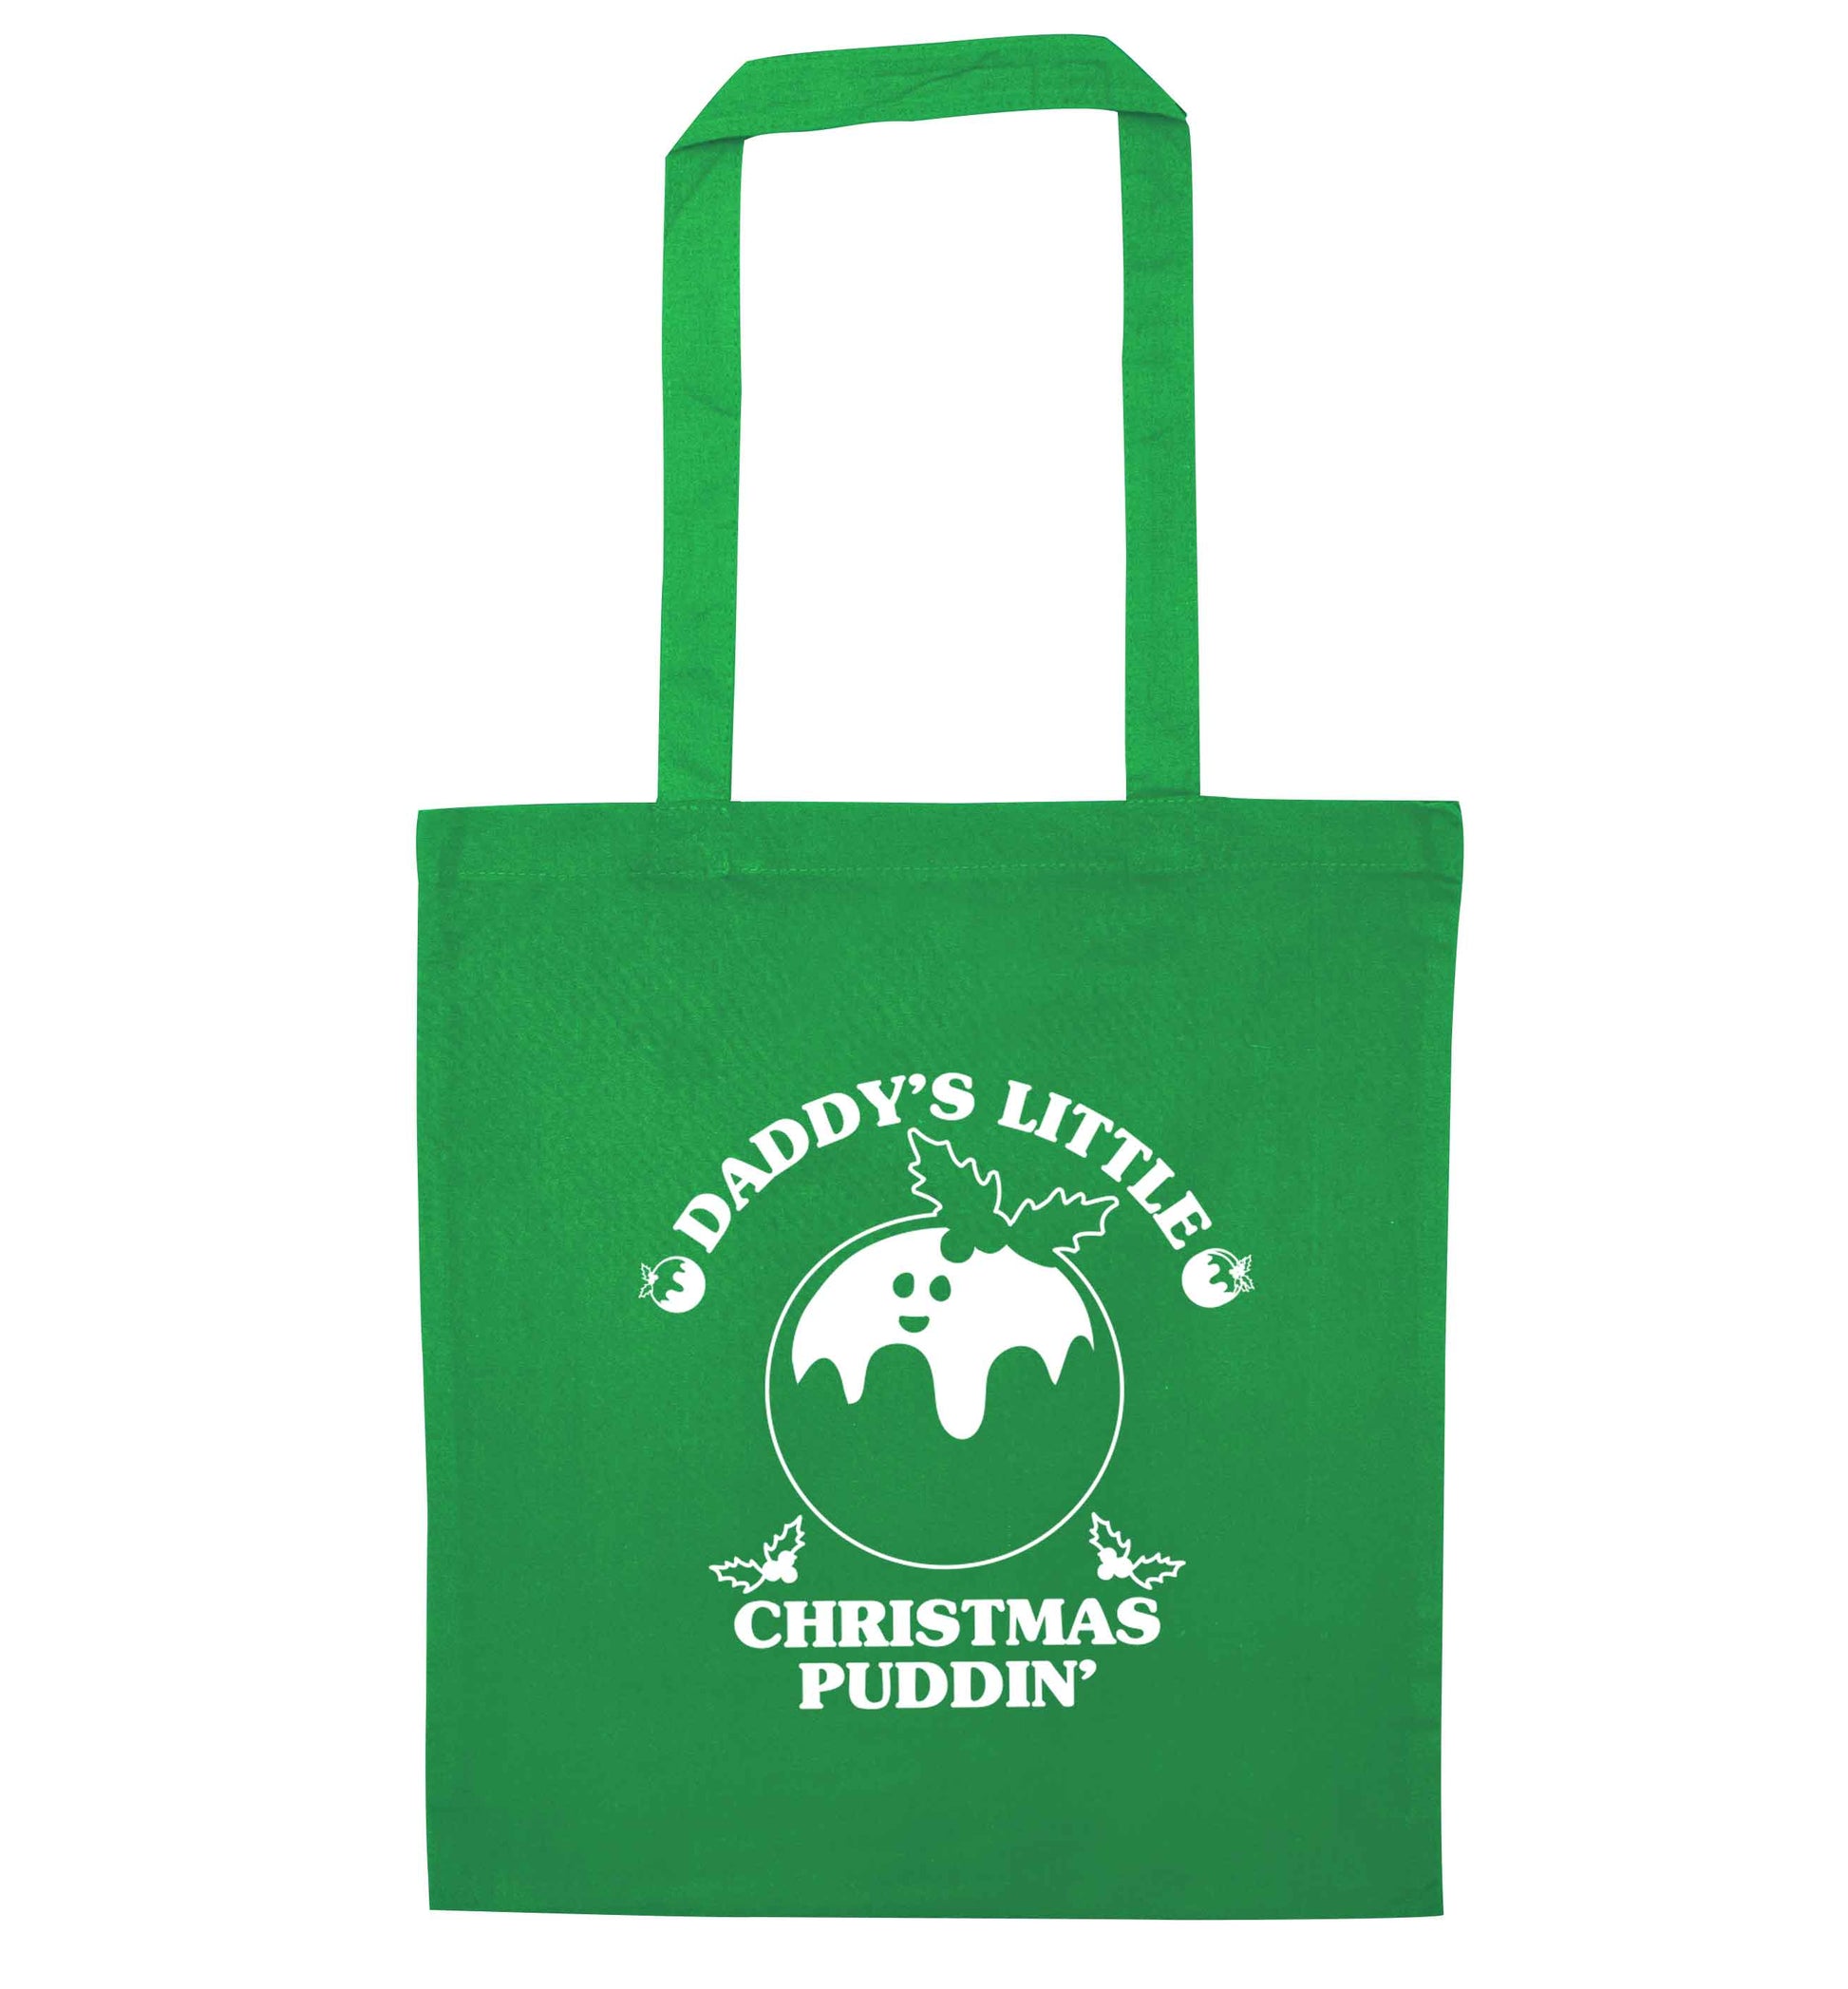 Daddy's little Christmas puddin' green tote bag